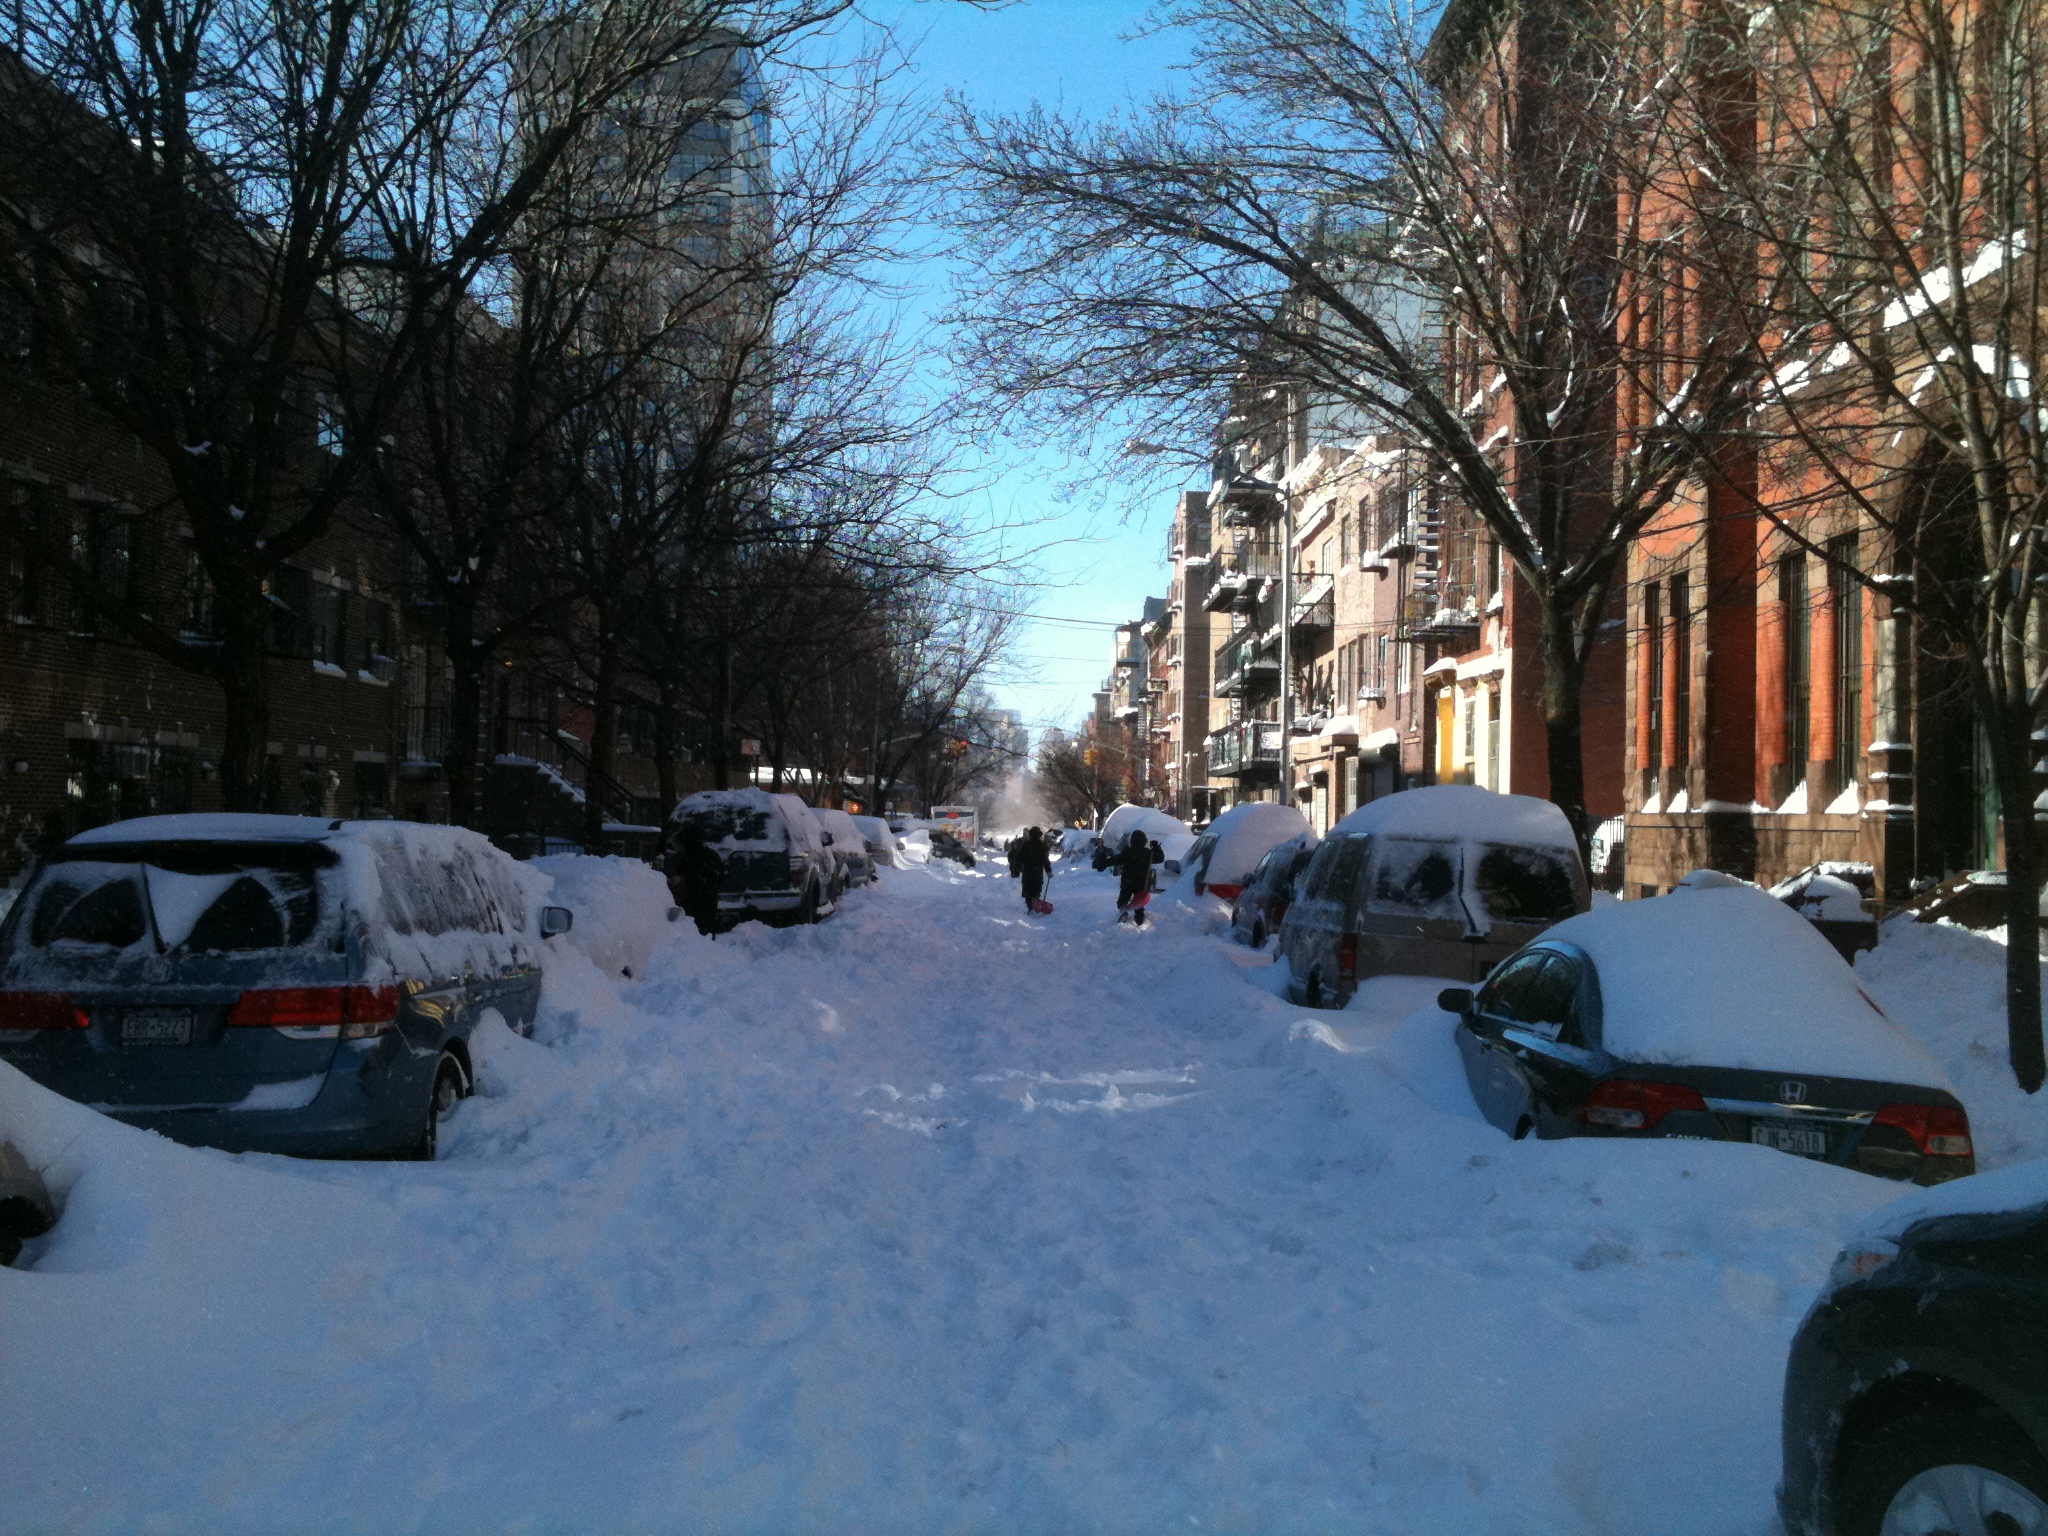 snow-south-8th-street-from-bedford-avenue-today-doug-rice.jpg 